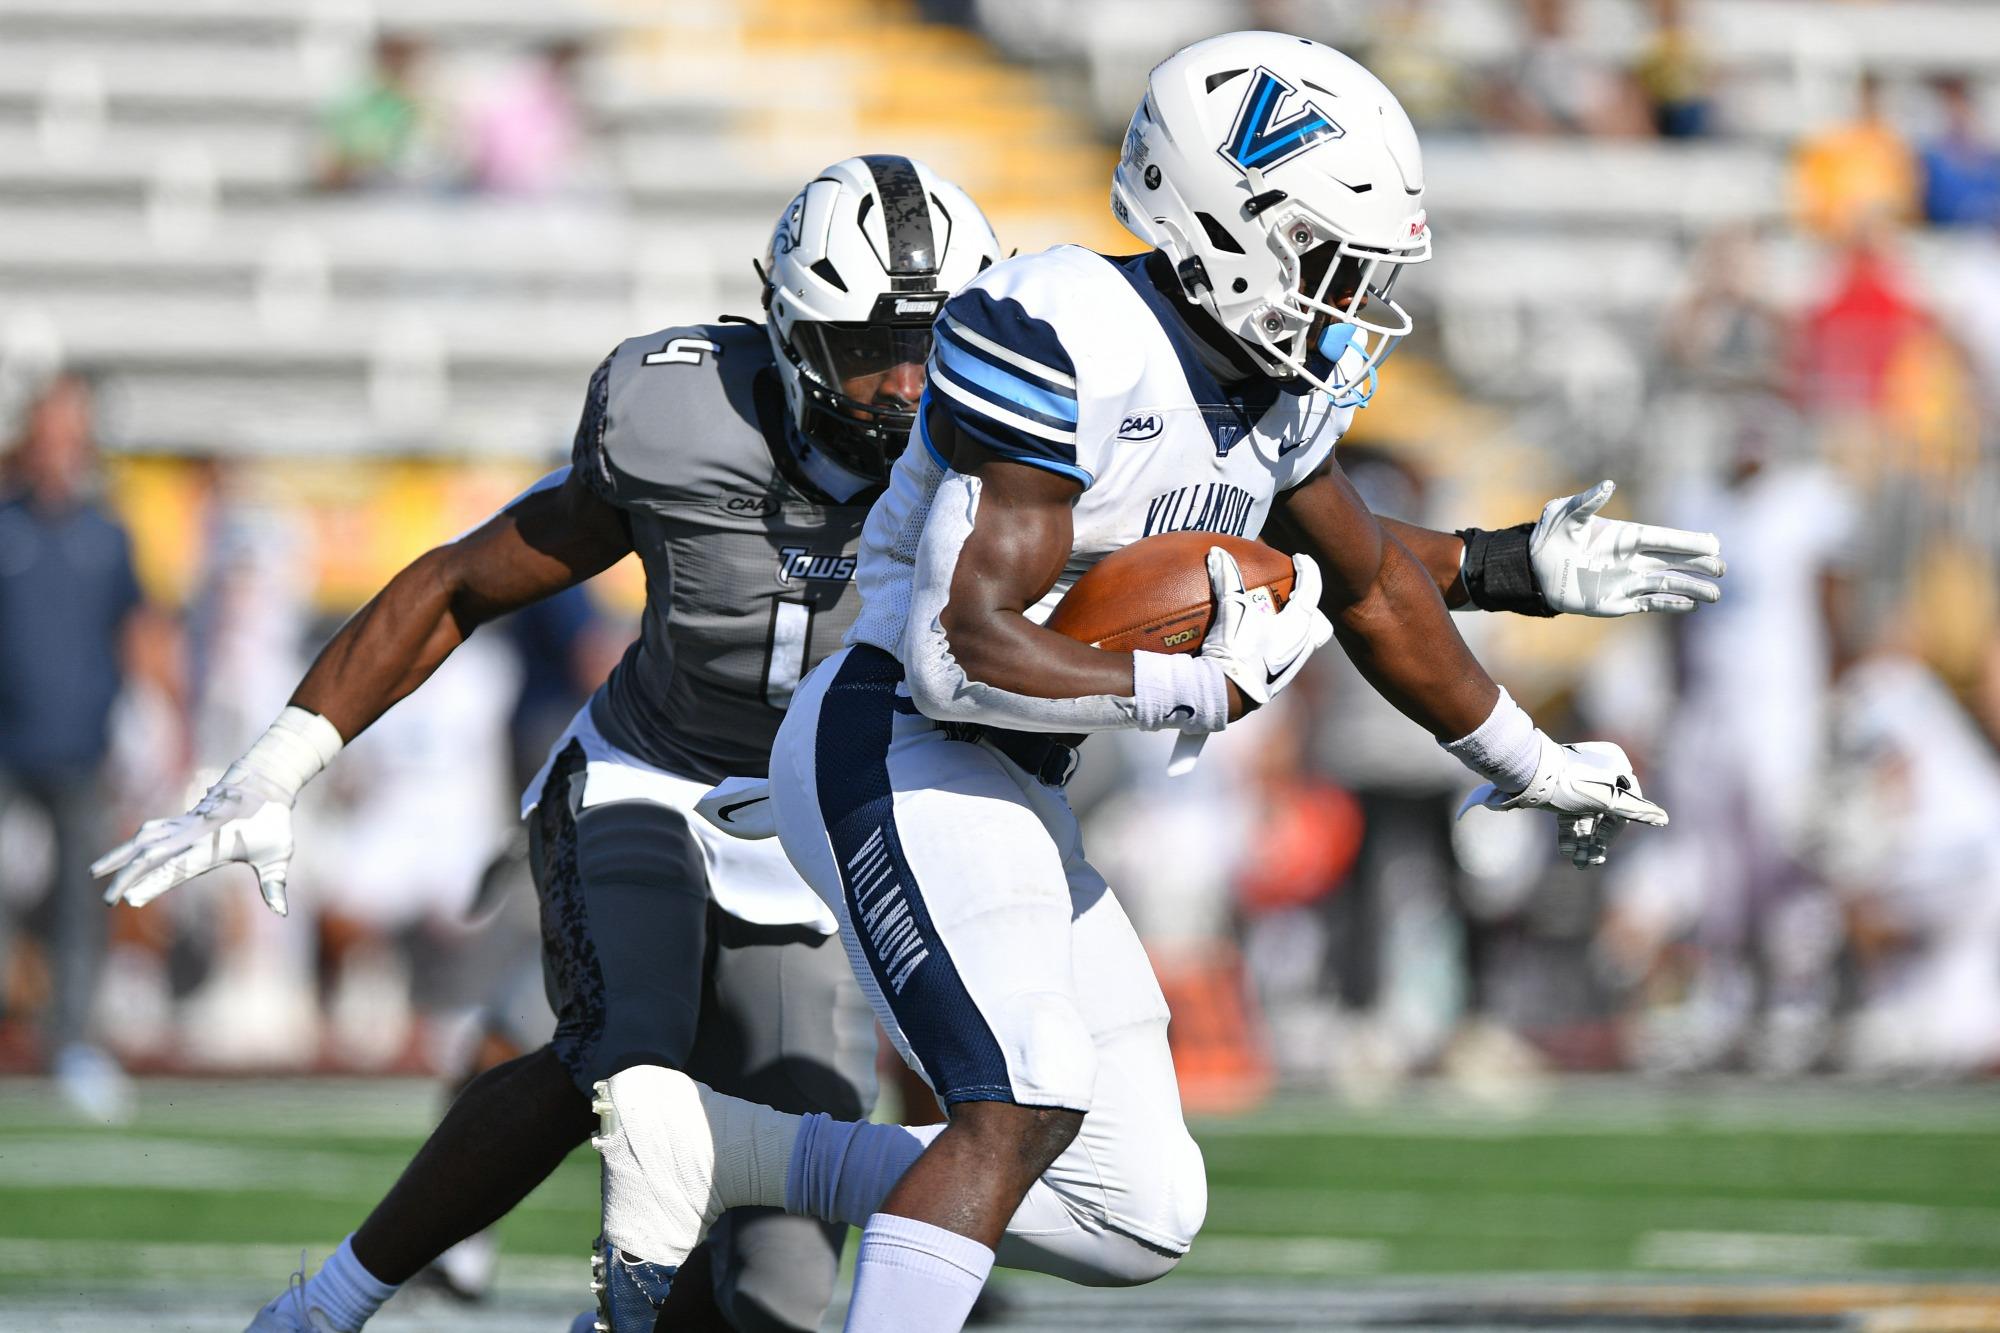 TD Ayo-Durojaiye is a do-it-all type of back at Villanova, displaying effectiveness as a runner, receiver, blocker and specialist. Hula Bowl scout Ian McNice breaks him down as an NFL Prospect in his report.